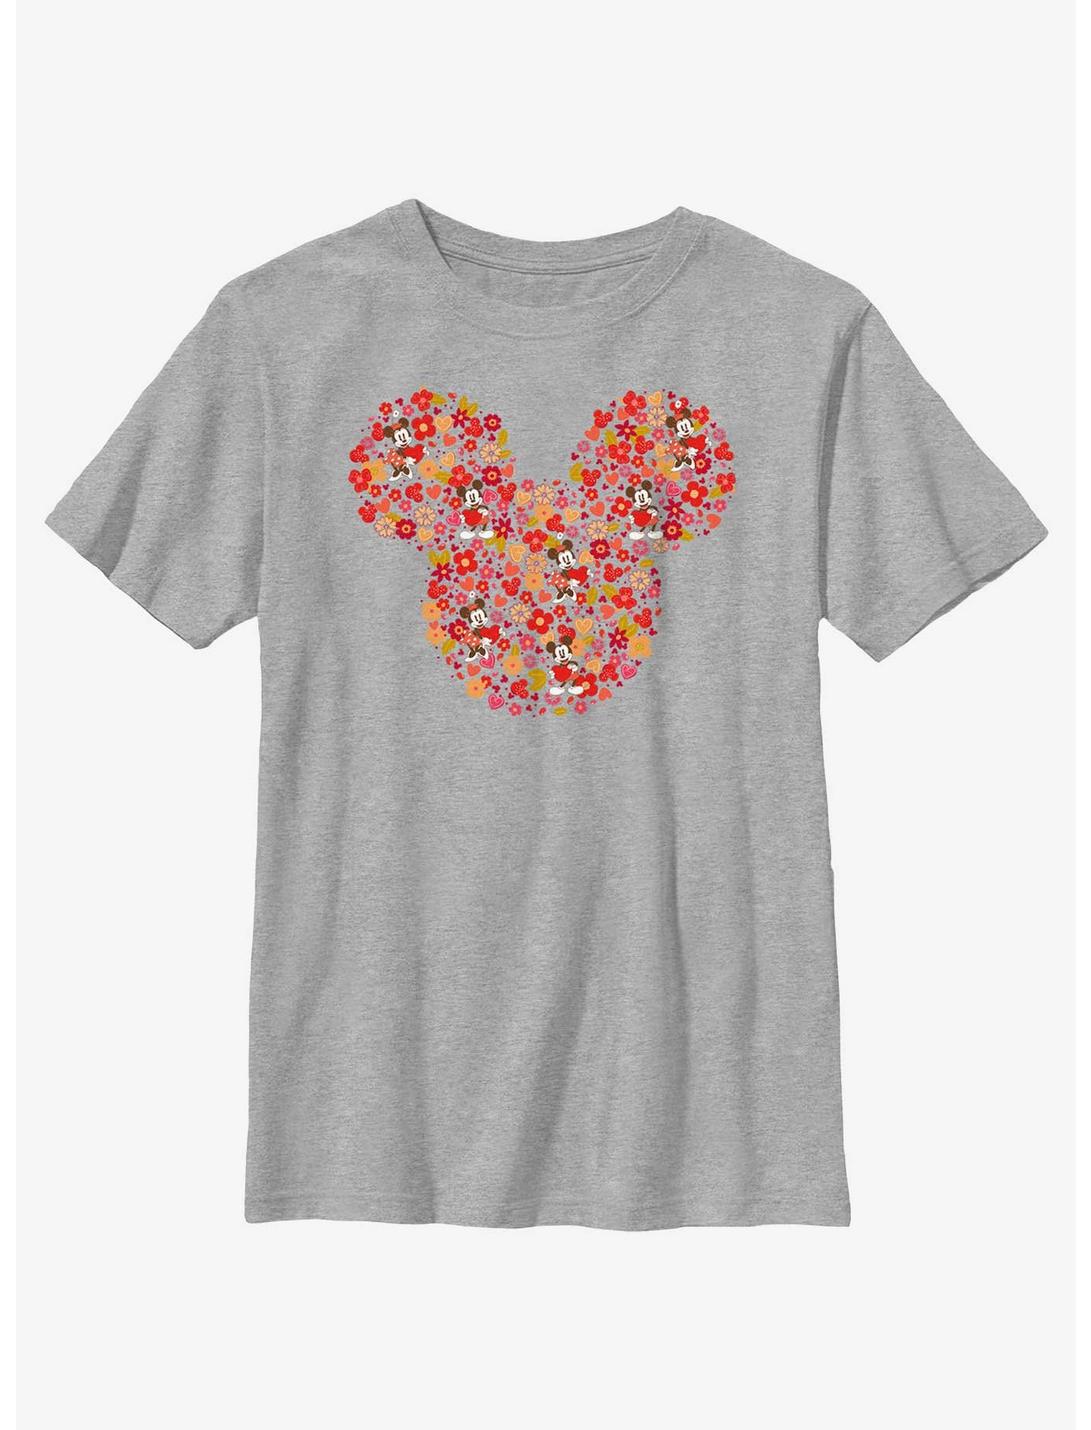 Disney Mickey Mouse Mickey Flowers Youth T-Shirt, ATH HTR, hi-res